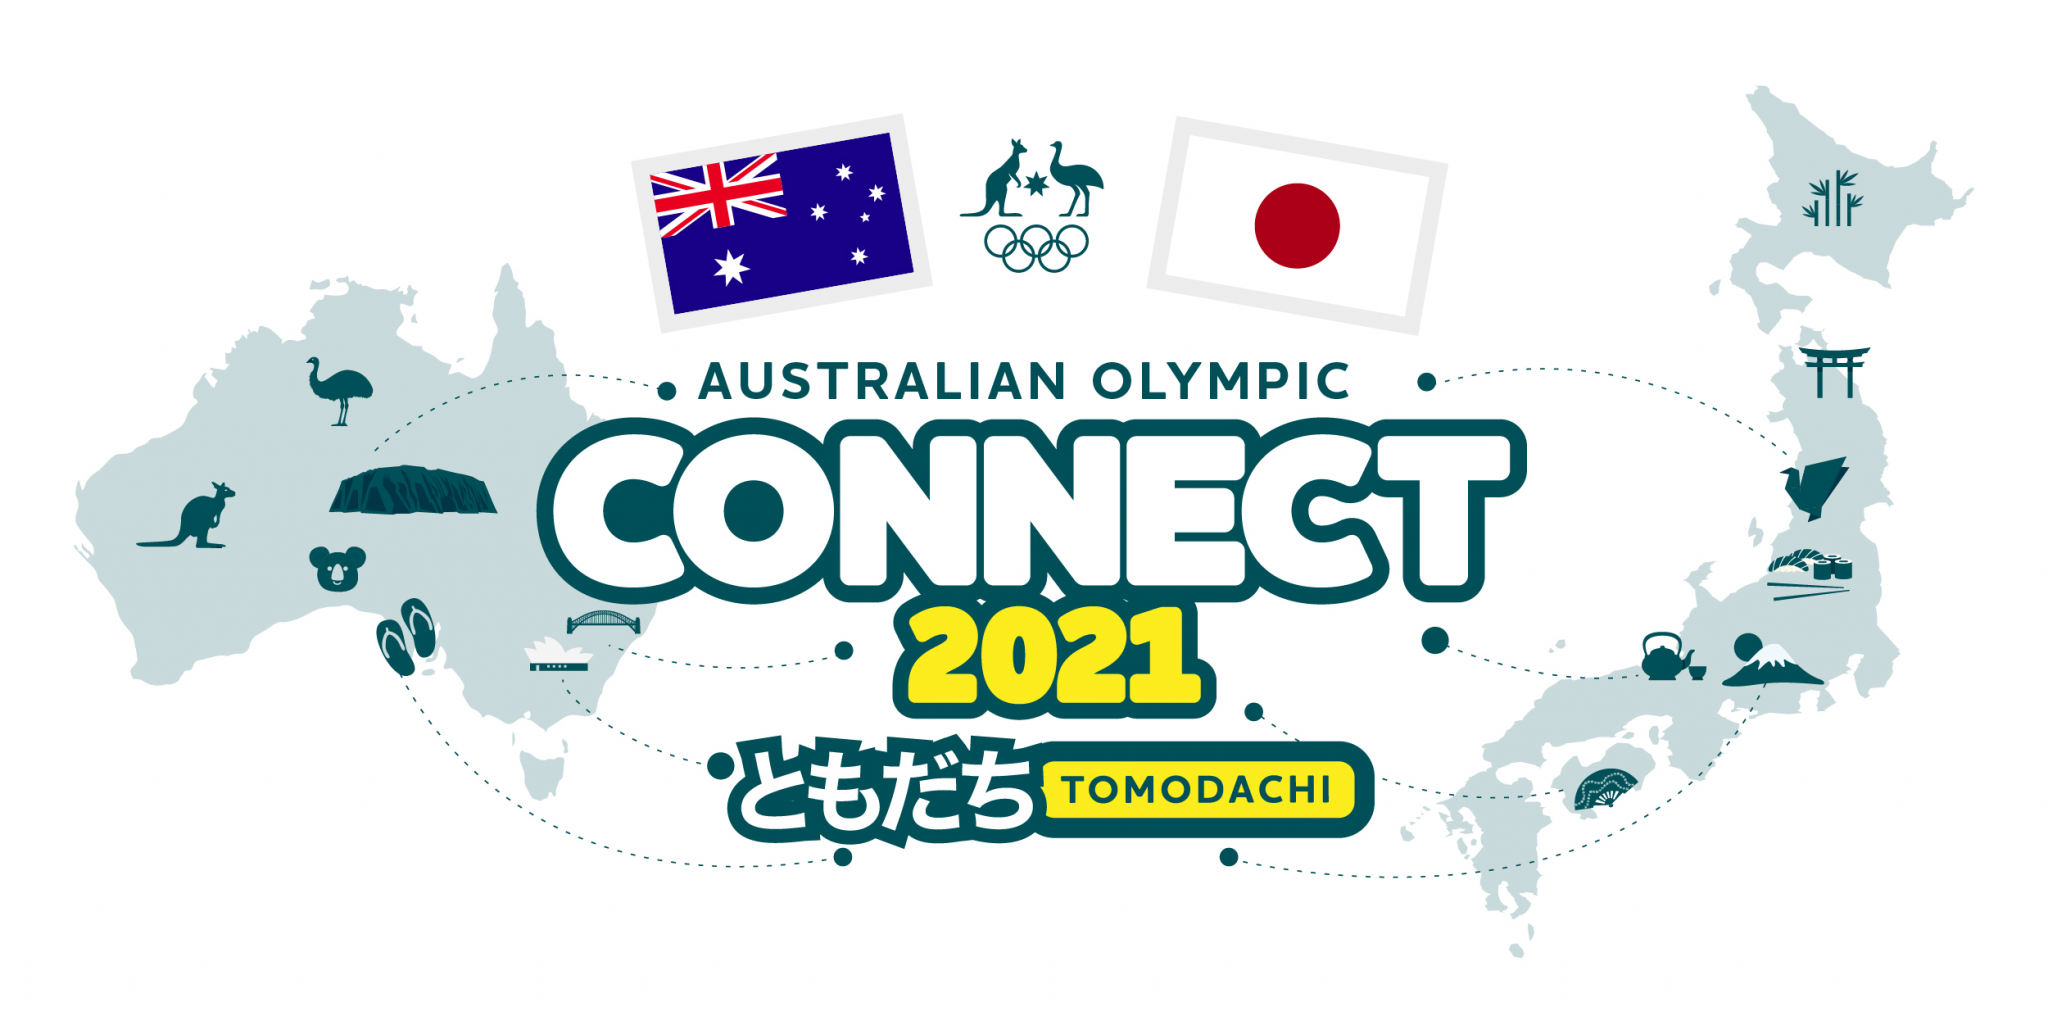 The AOC has announced a full Australian Olympic Connect programme in 2021 to link up with Japanese students before Tokyo 2020 ©AOC